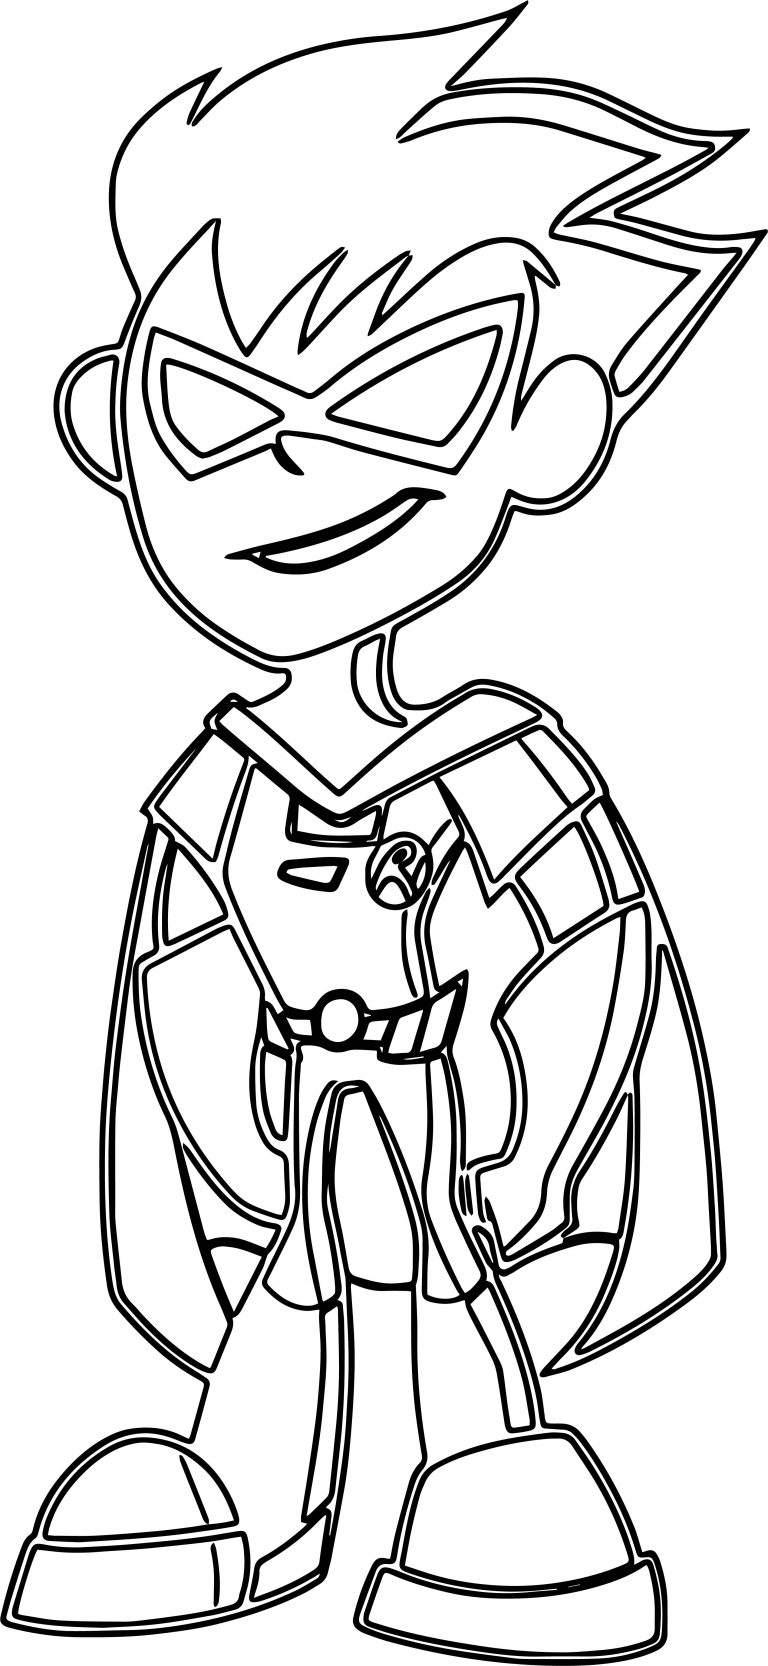 Teen Titans Go Robin Outline Coloring Page | Wecoloringpage.com